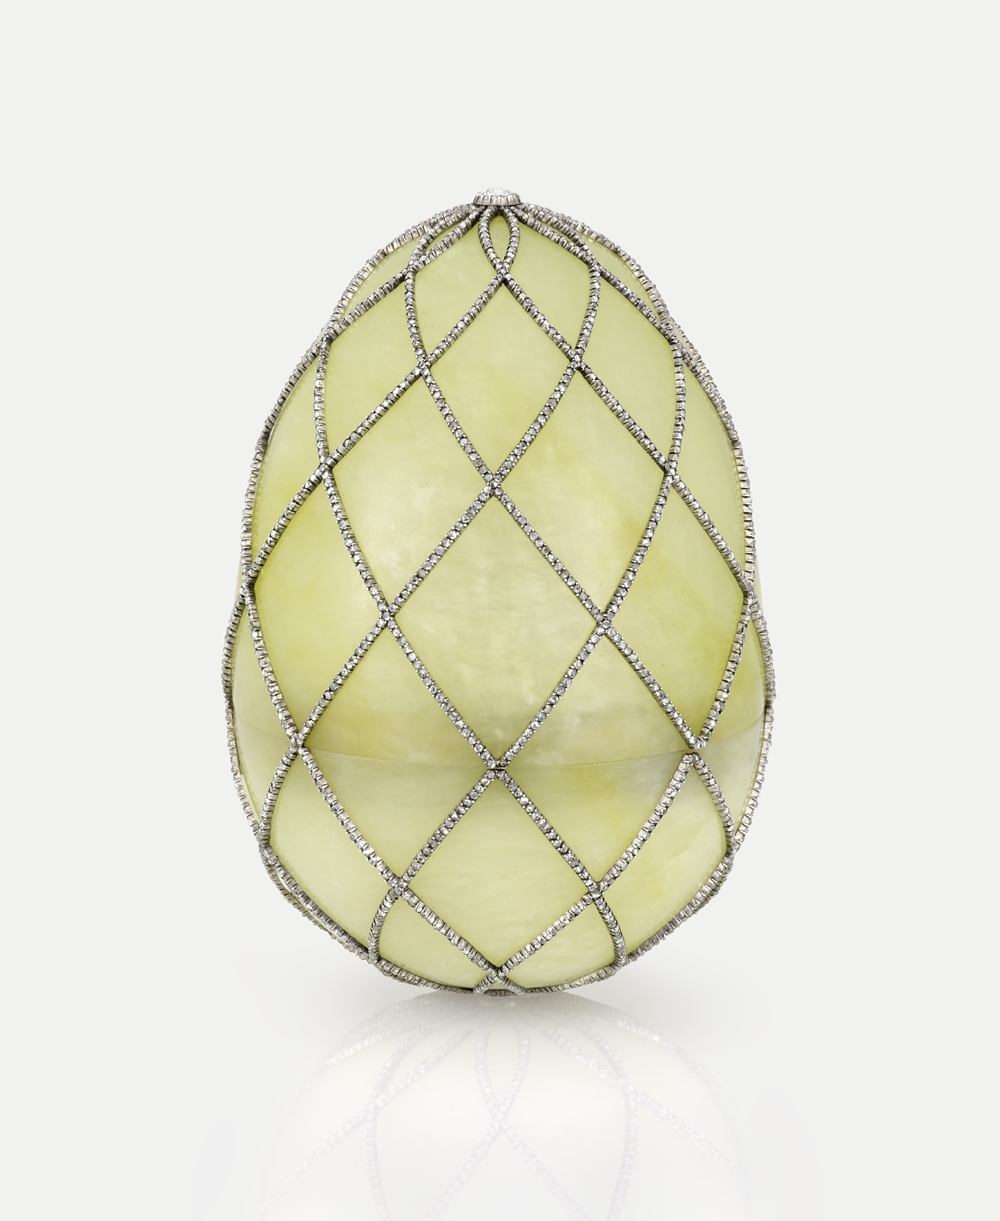 Imperial Diamond Trellis Egg by Faberge, workmaster August Holmstrom, St. Petersburg 1891. This Egg was a gift of Tsar Alexander III to Tsarina. Image courtesy the Houston Museum of Natural Science.